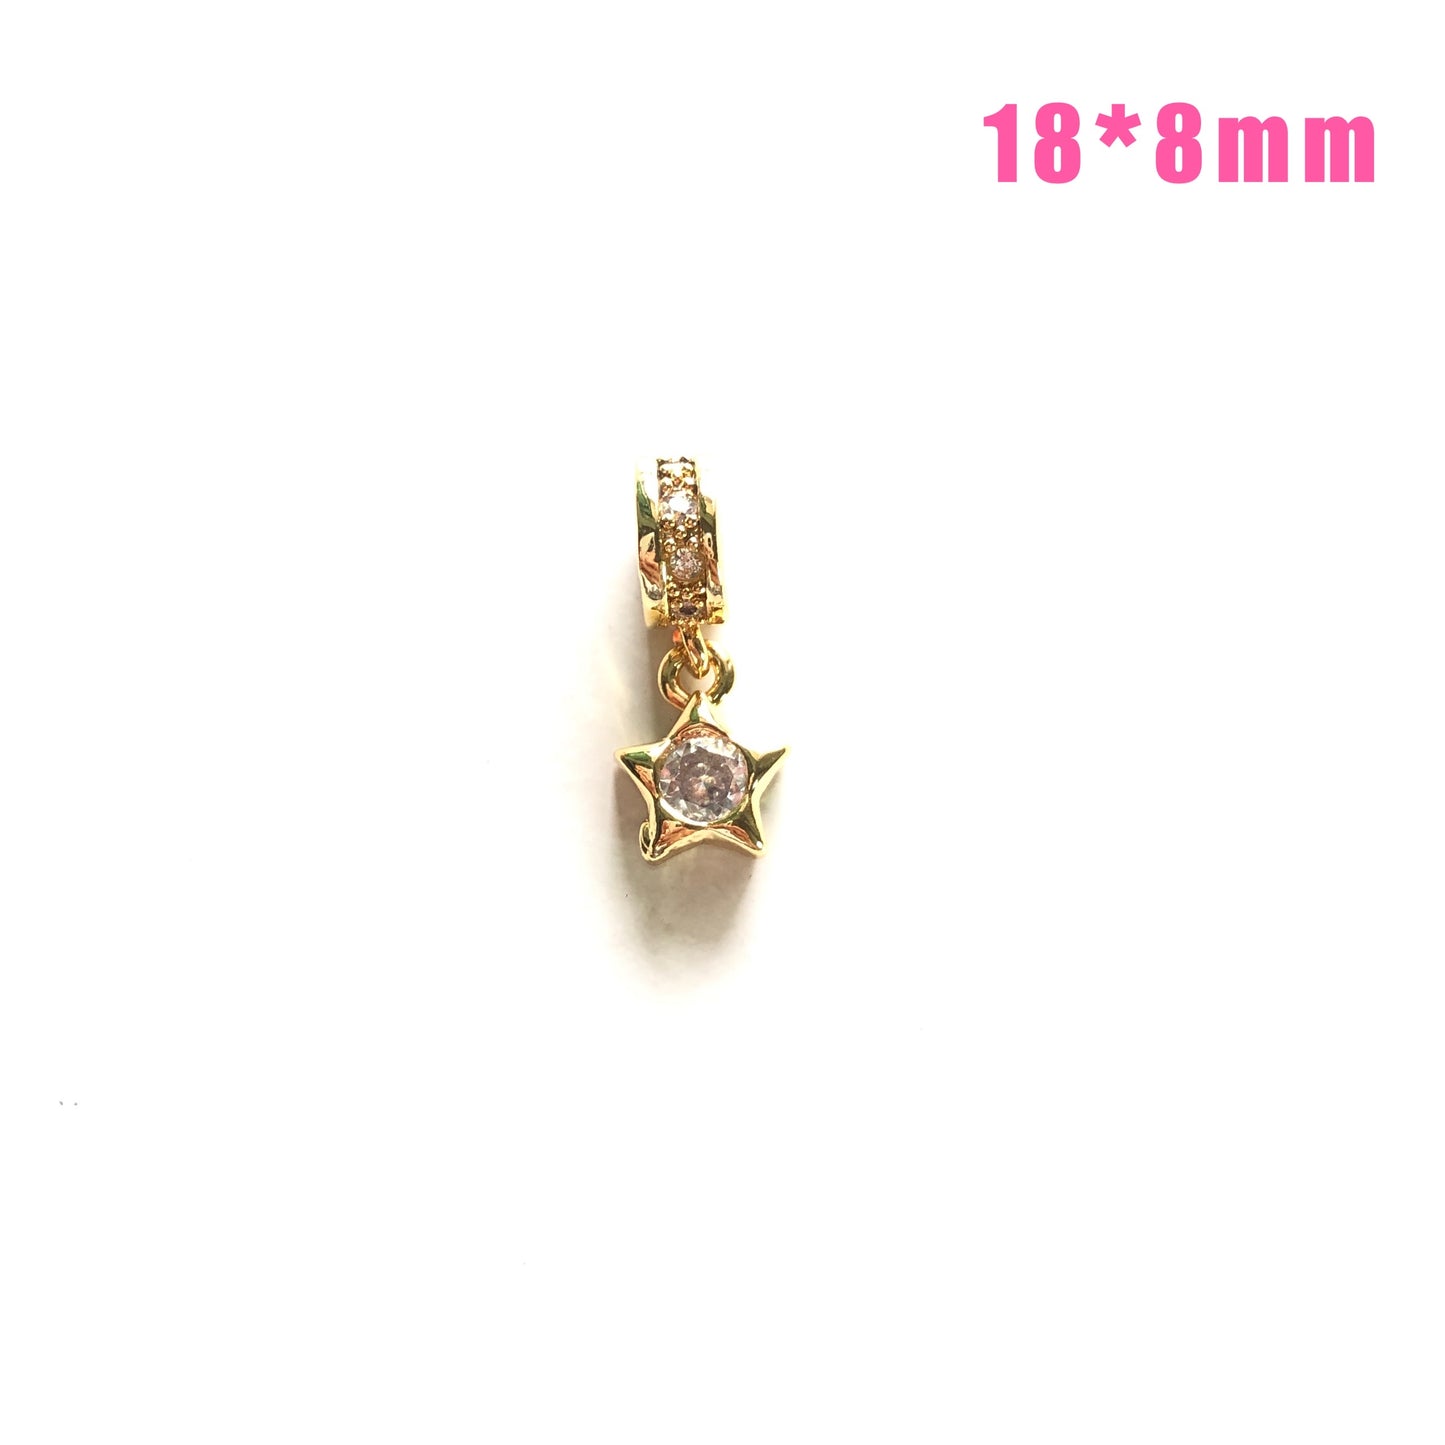 10pcs/lot Small Size CZ Paved Butterfly, Eye, Heart, Cross, Star, Moon Charms Star 1 CZ Paved Charms Small Sizes Charms Beads Beyond